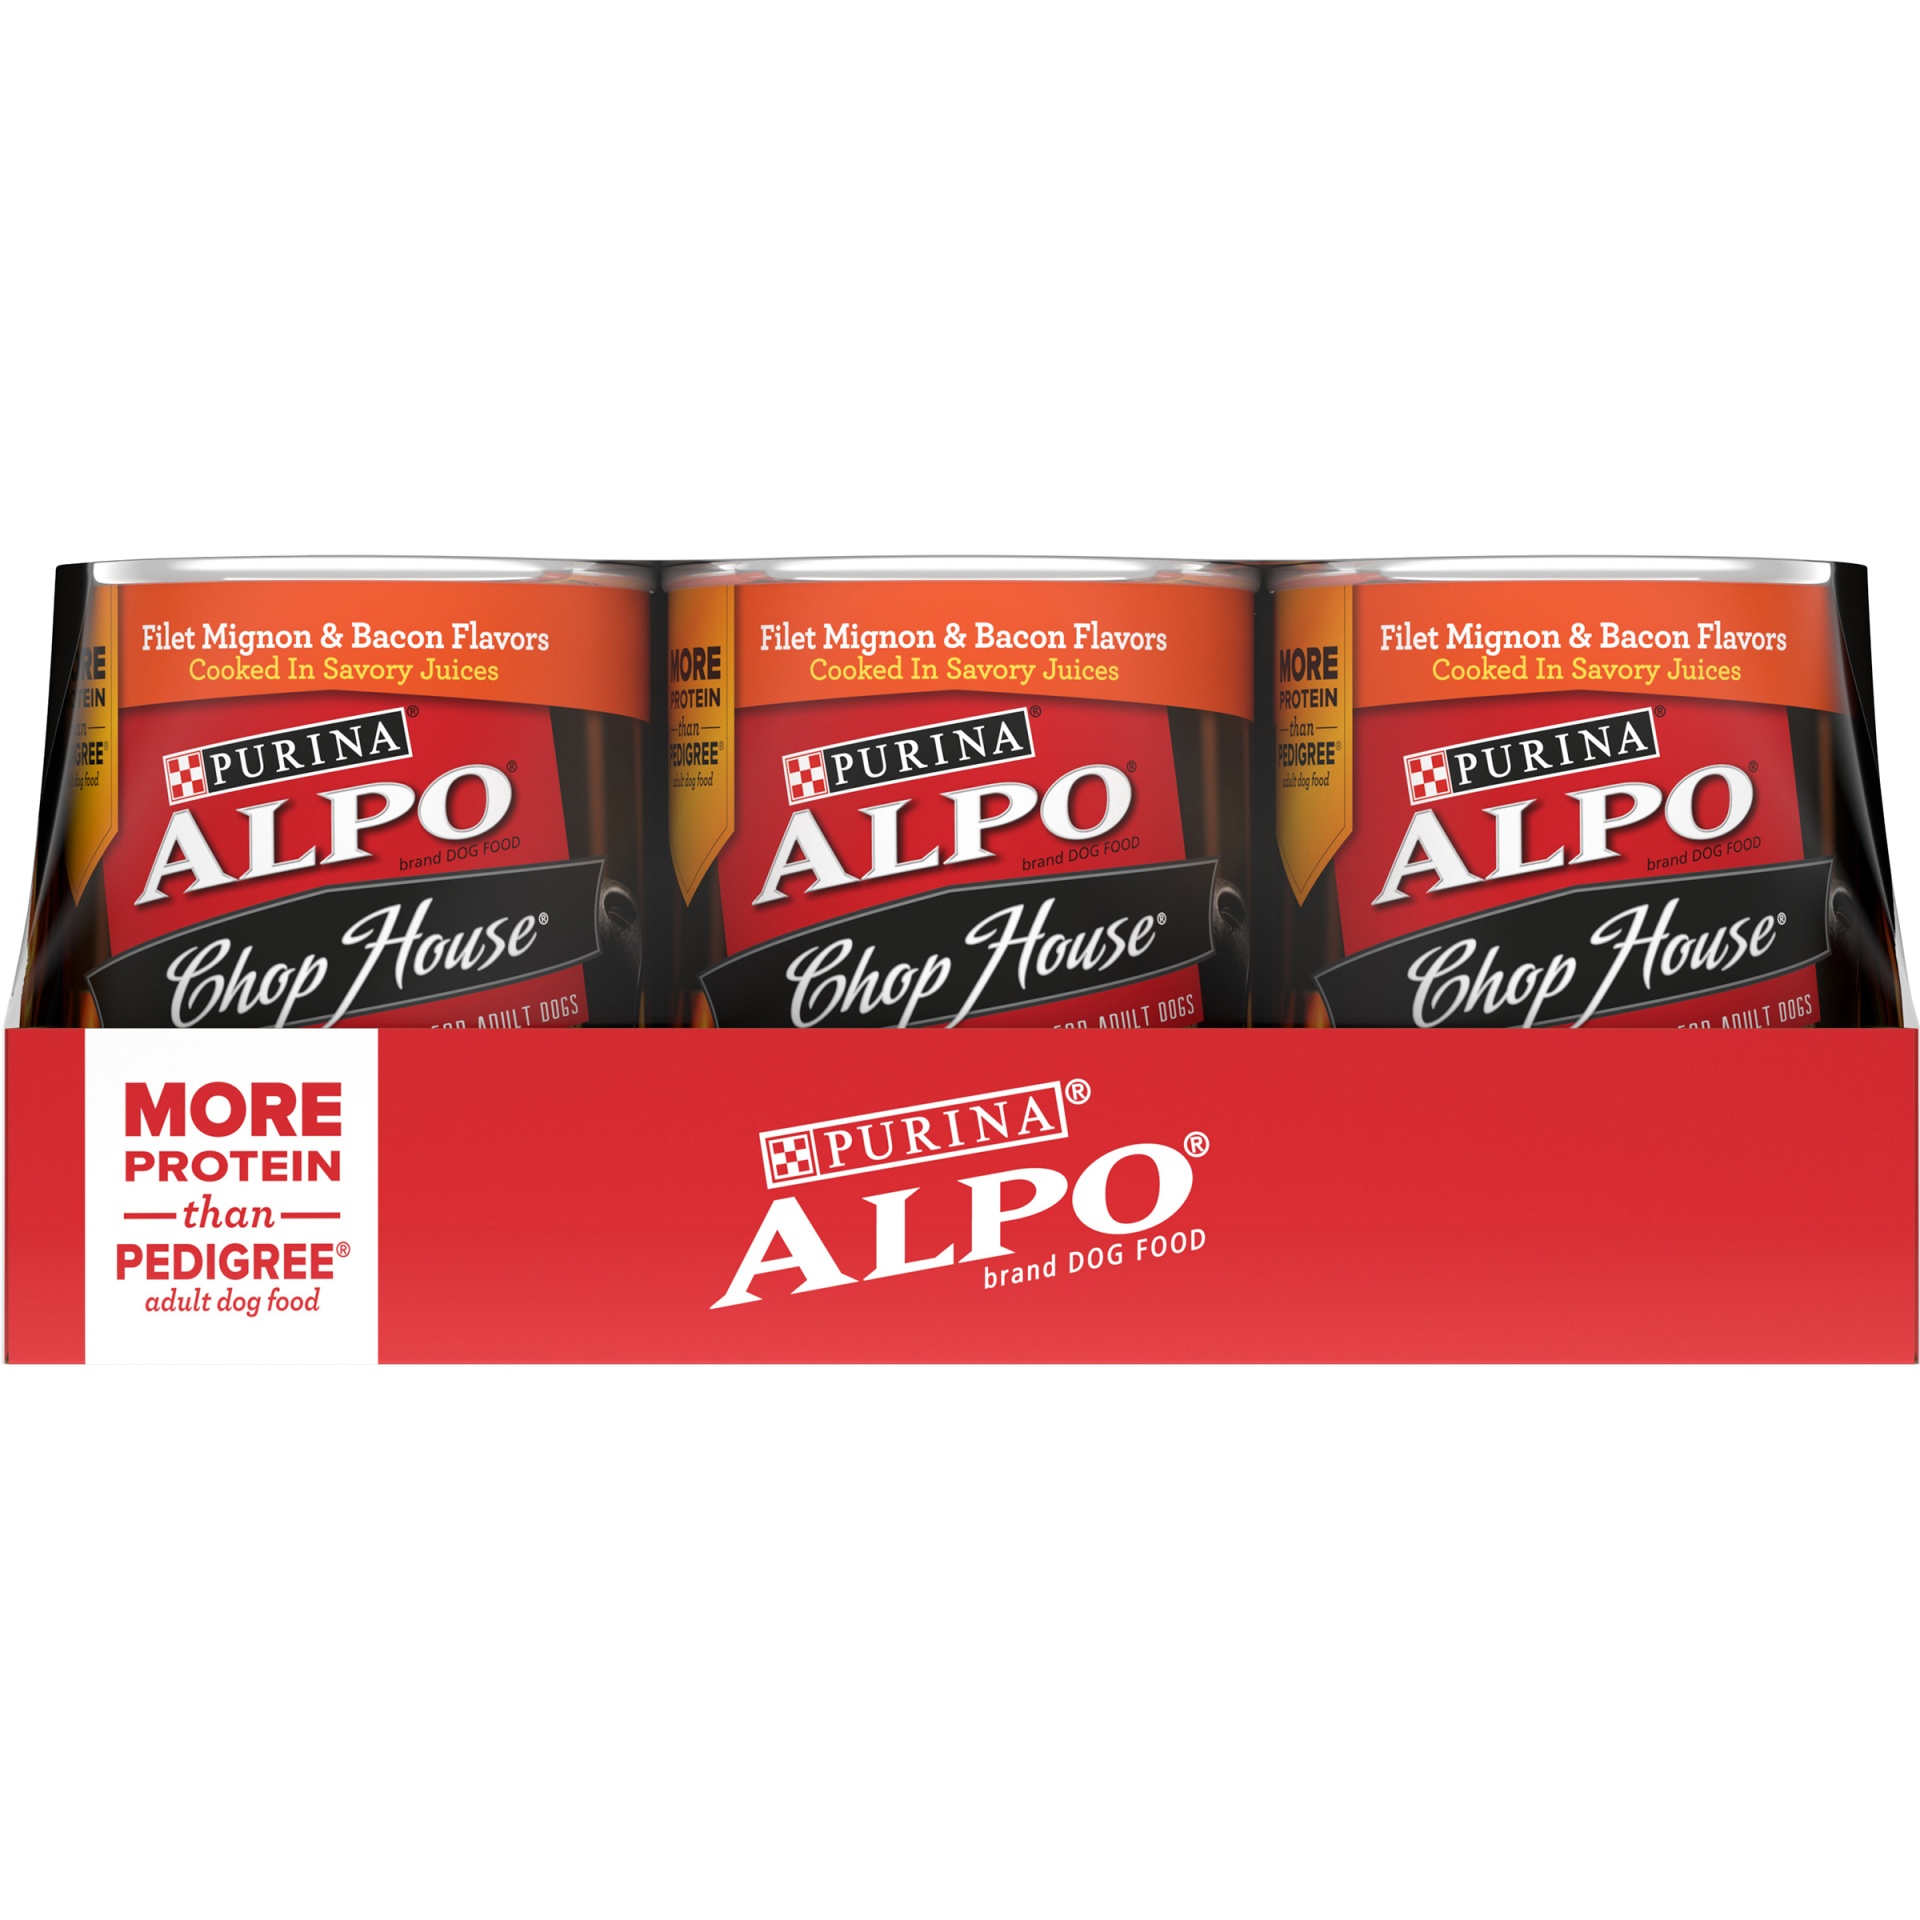 slide 4 of 9, ALPO Chophouse Variety Pack - Filet Mignon & Bacon and Roasted Chicken & Top Sirloin, 12 ct; 13.2 oz